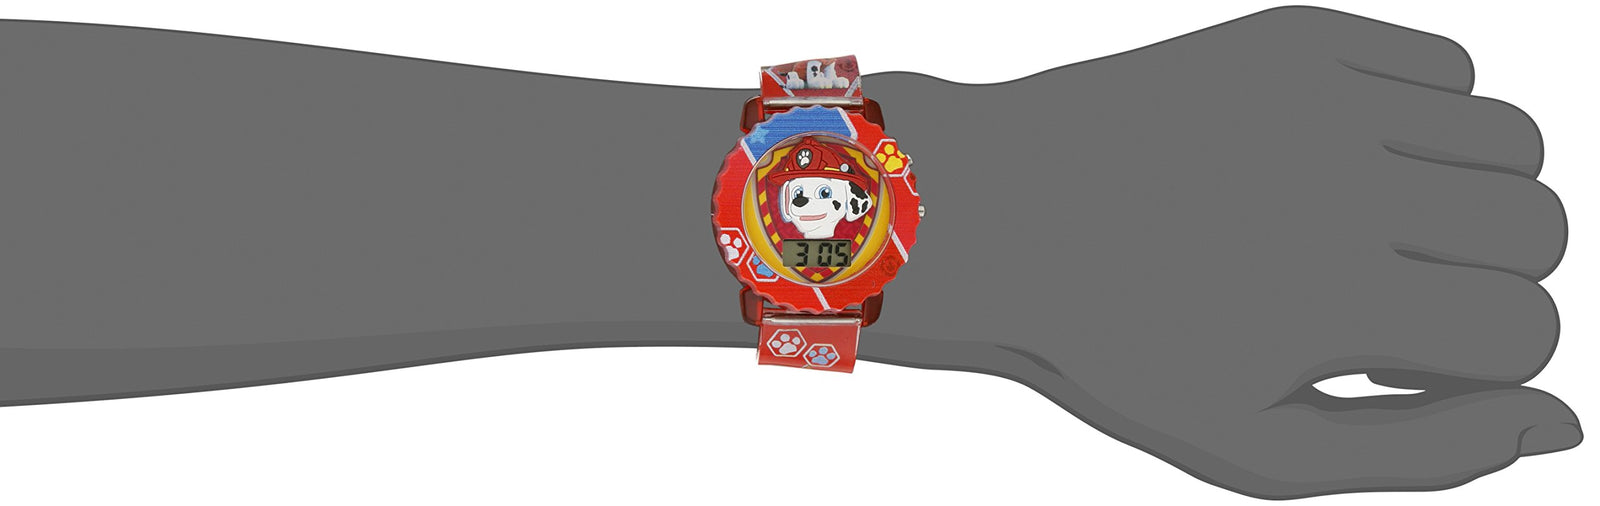 Paw Patrol Kids' Digital Watch with Red Case, Comfortable Red Strap, Easy to Buckle - Official 3D Paw Patrol Character on the Dial, Safe for Children - Model: PAW4016